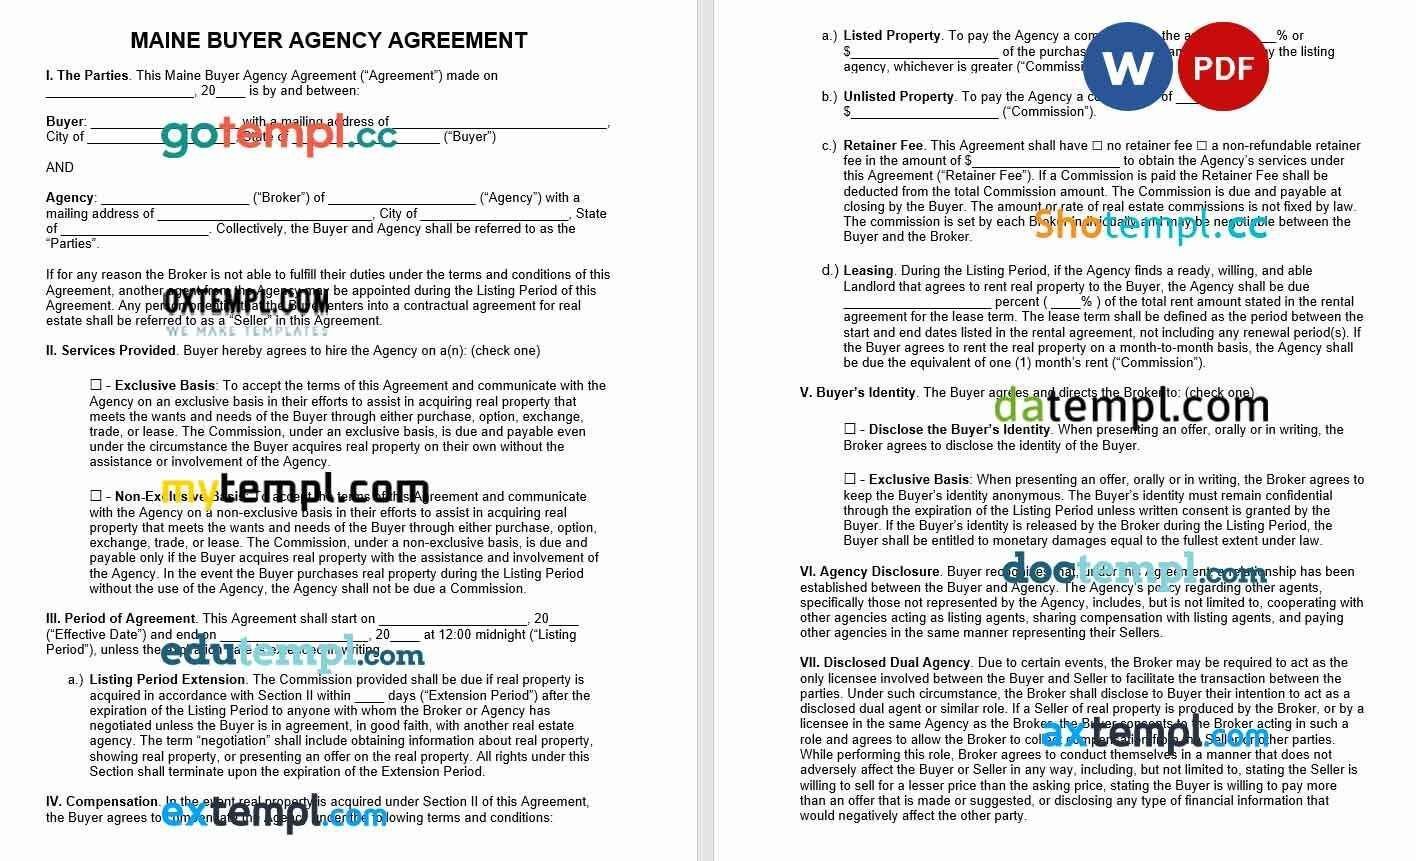 Maine Buyer Agency Agreement Word example, fully editable